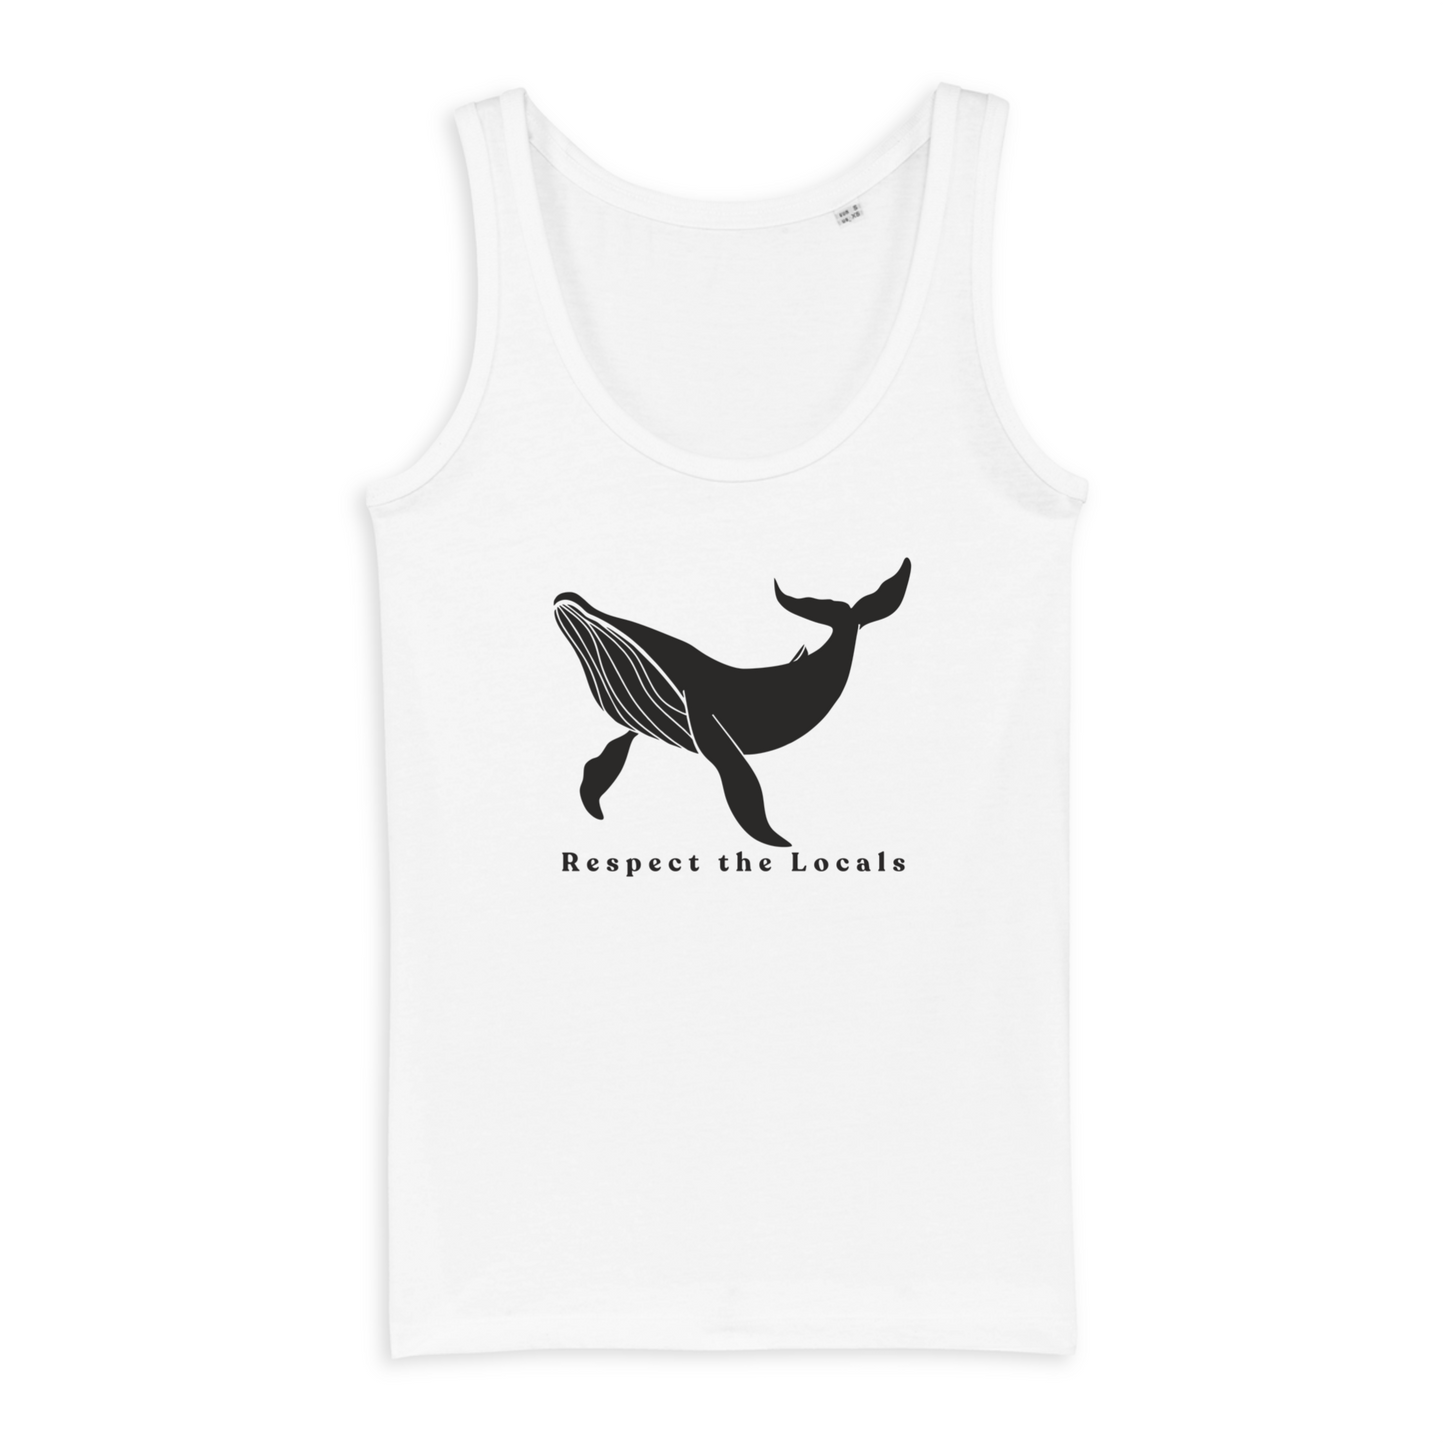 Organic cotton clothes for women, Organic Cotton Clothing for Women, Organic Cotton Tank Tops, Cotton Organic T Shirts, Organic Cotton T Shirt, Band Tees, Vintage Tees, Rolling Stones Bomber Jacket, Stoned Girls, She's a rainbow, Environmental Slogan Tshirt, Environmental Slogan Tee, respect the locals, organic tank top, whale tank top, whale tshirt, courtney barriger 